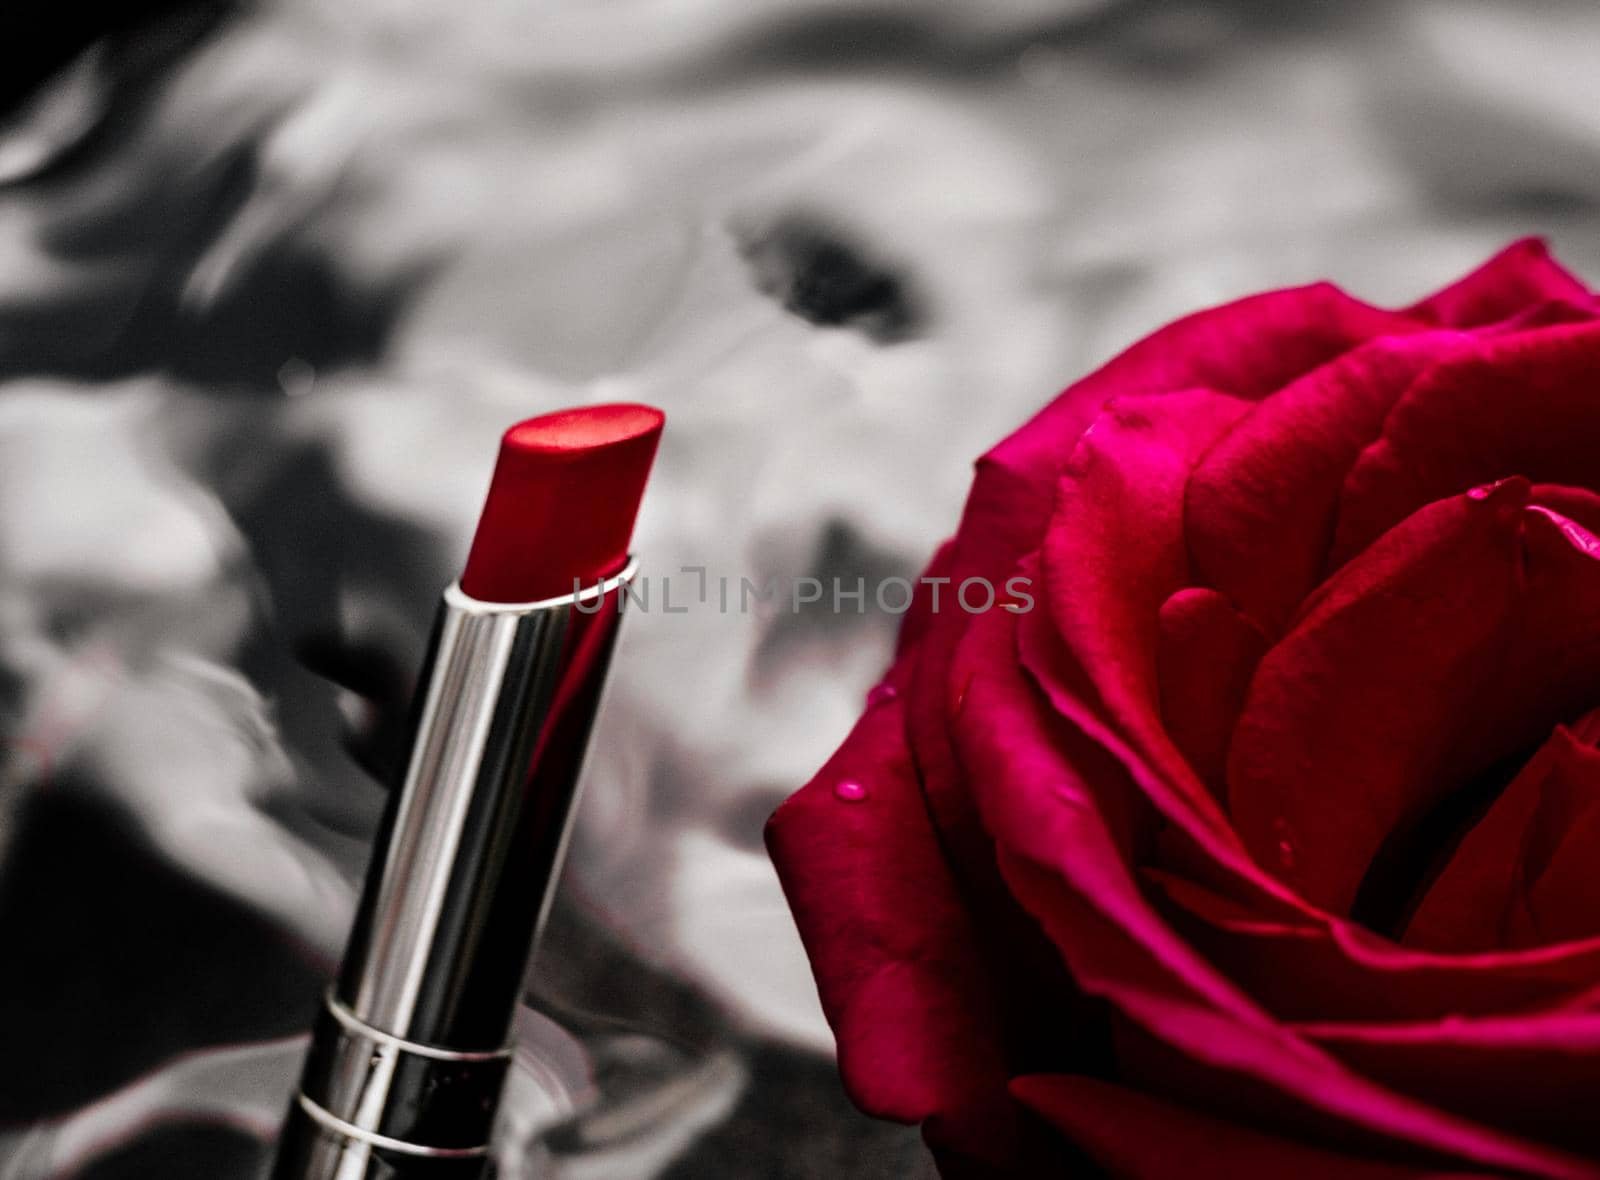 luxe red lipstick and a wonderful rose - make-up and cosmetics styled beauty concept by Anneleven